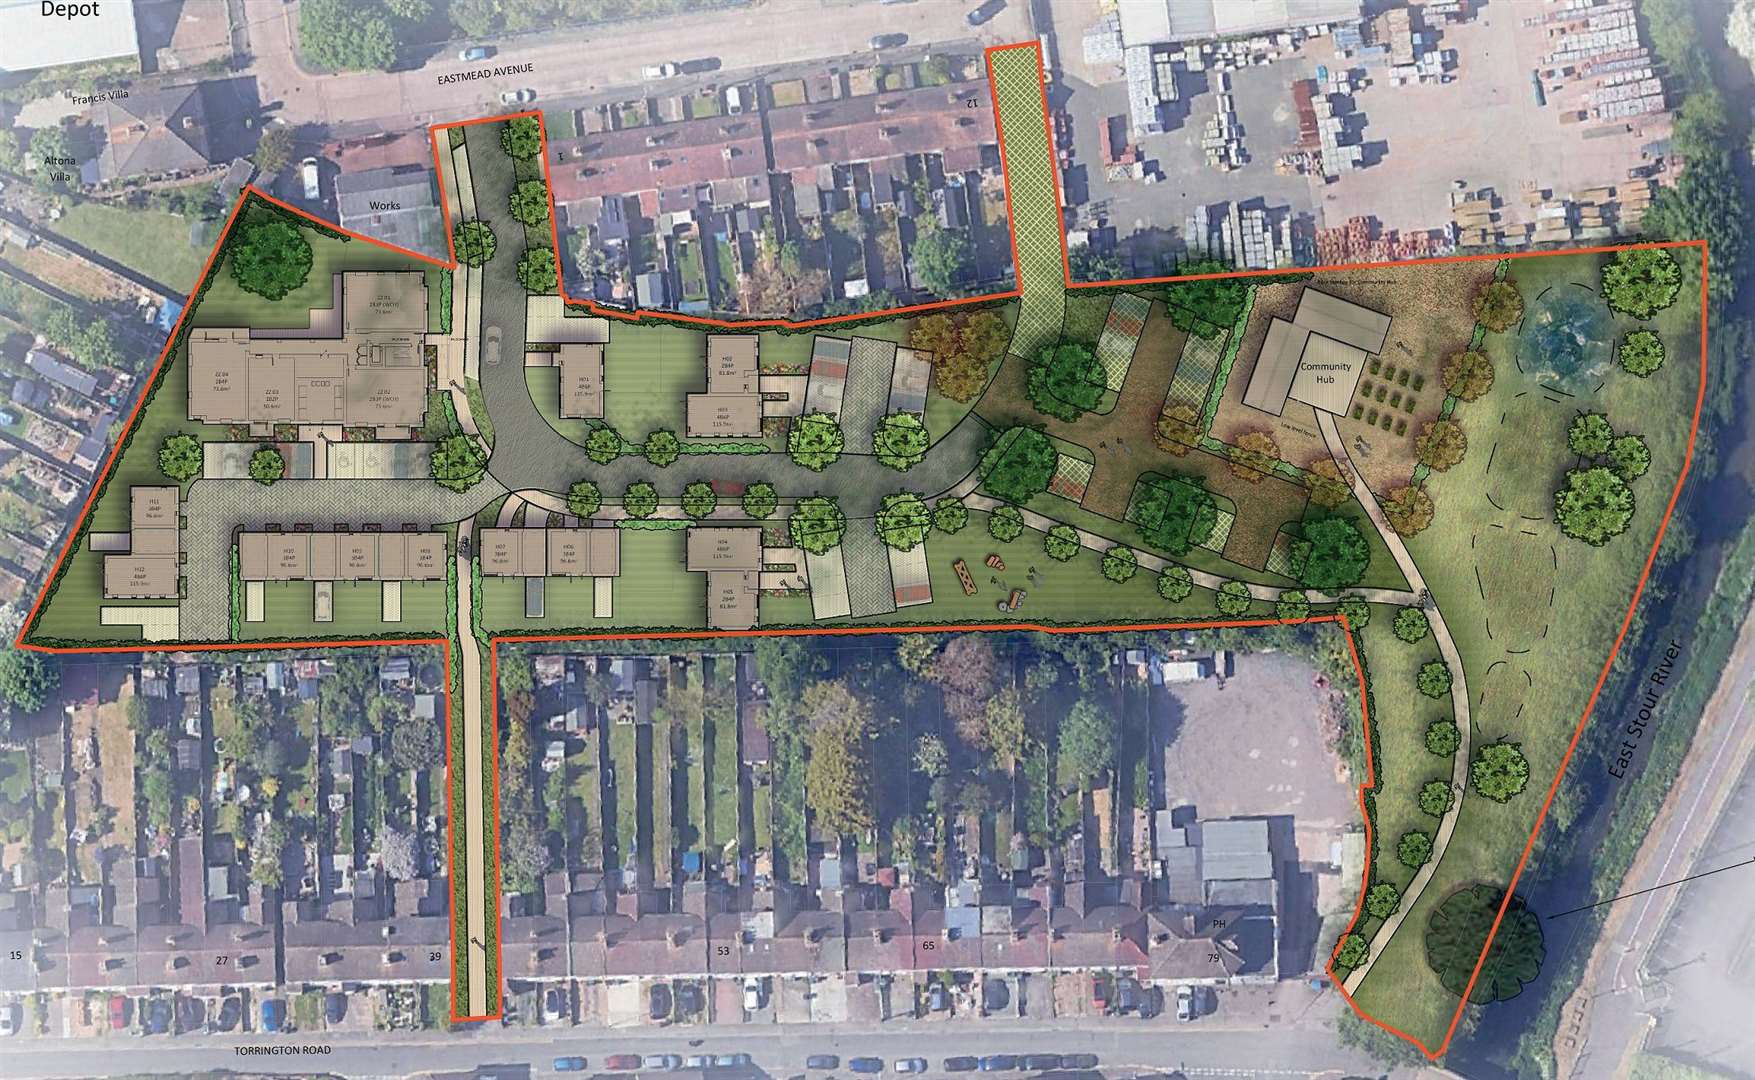 A bird’s eye view of what the development could look like. Picture: Ashford Borough Council